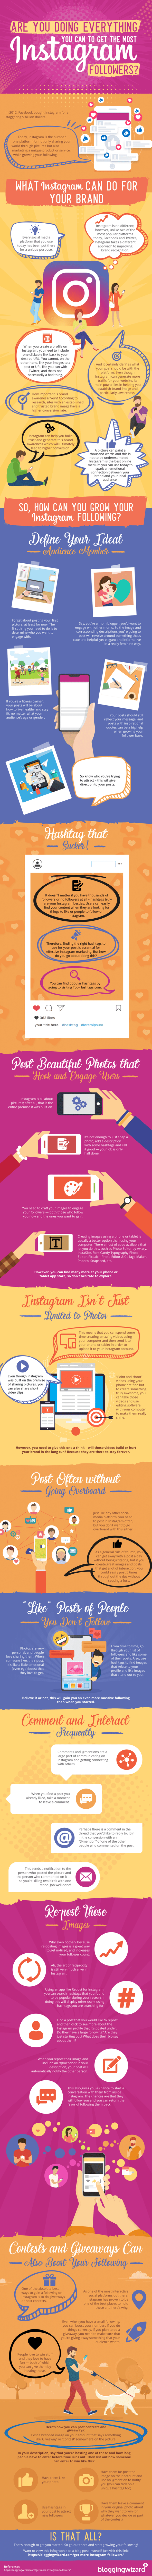 Definitive Guide To Growing Your Instagram Following Faster Infographic